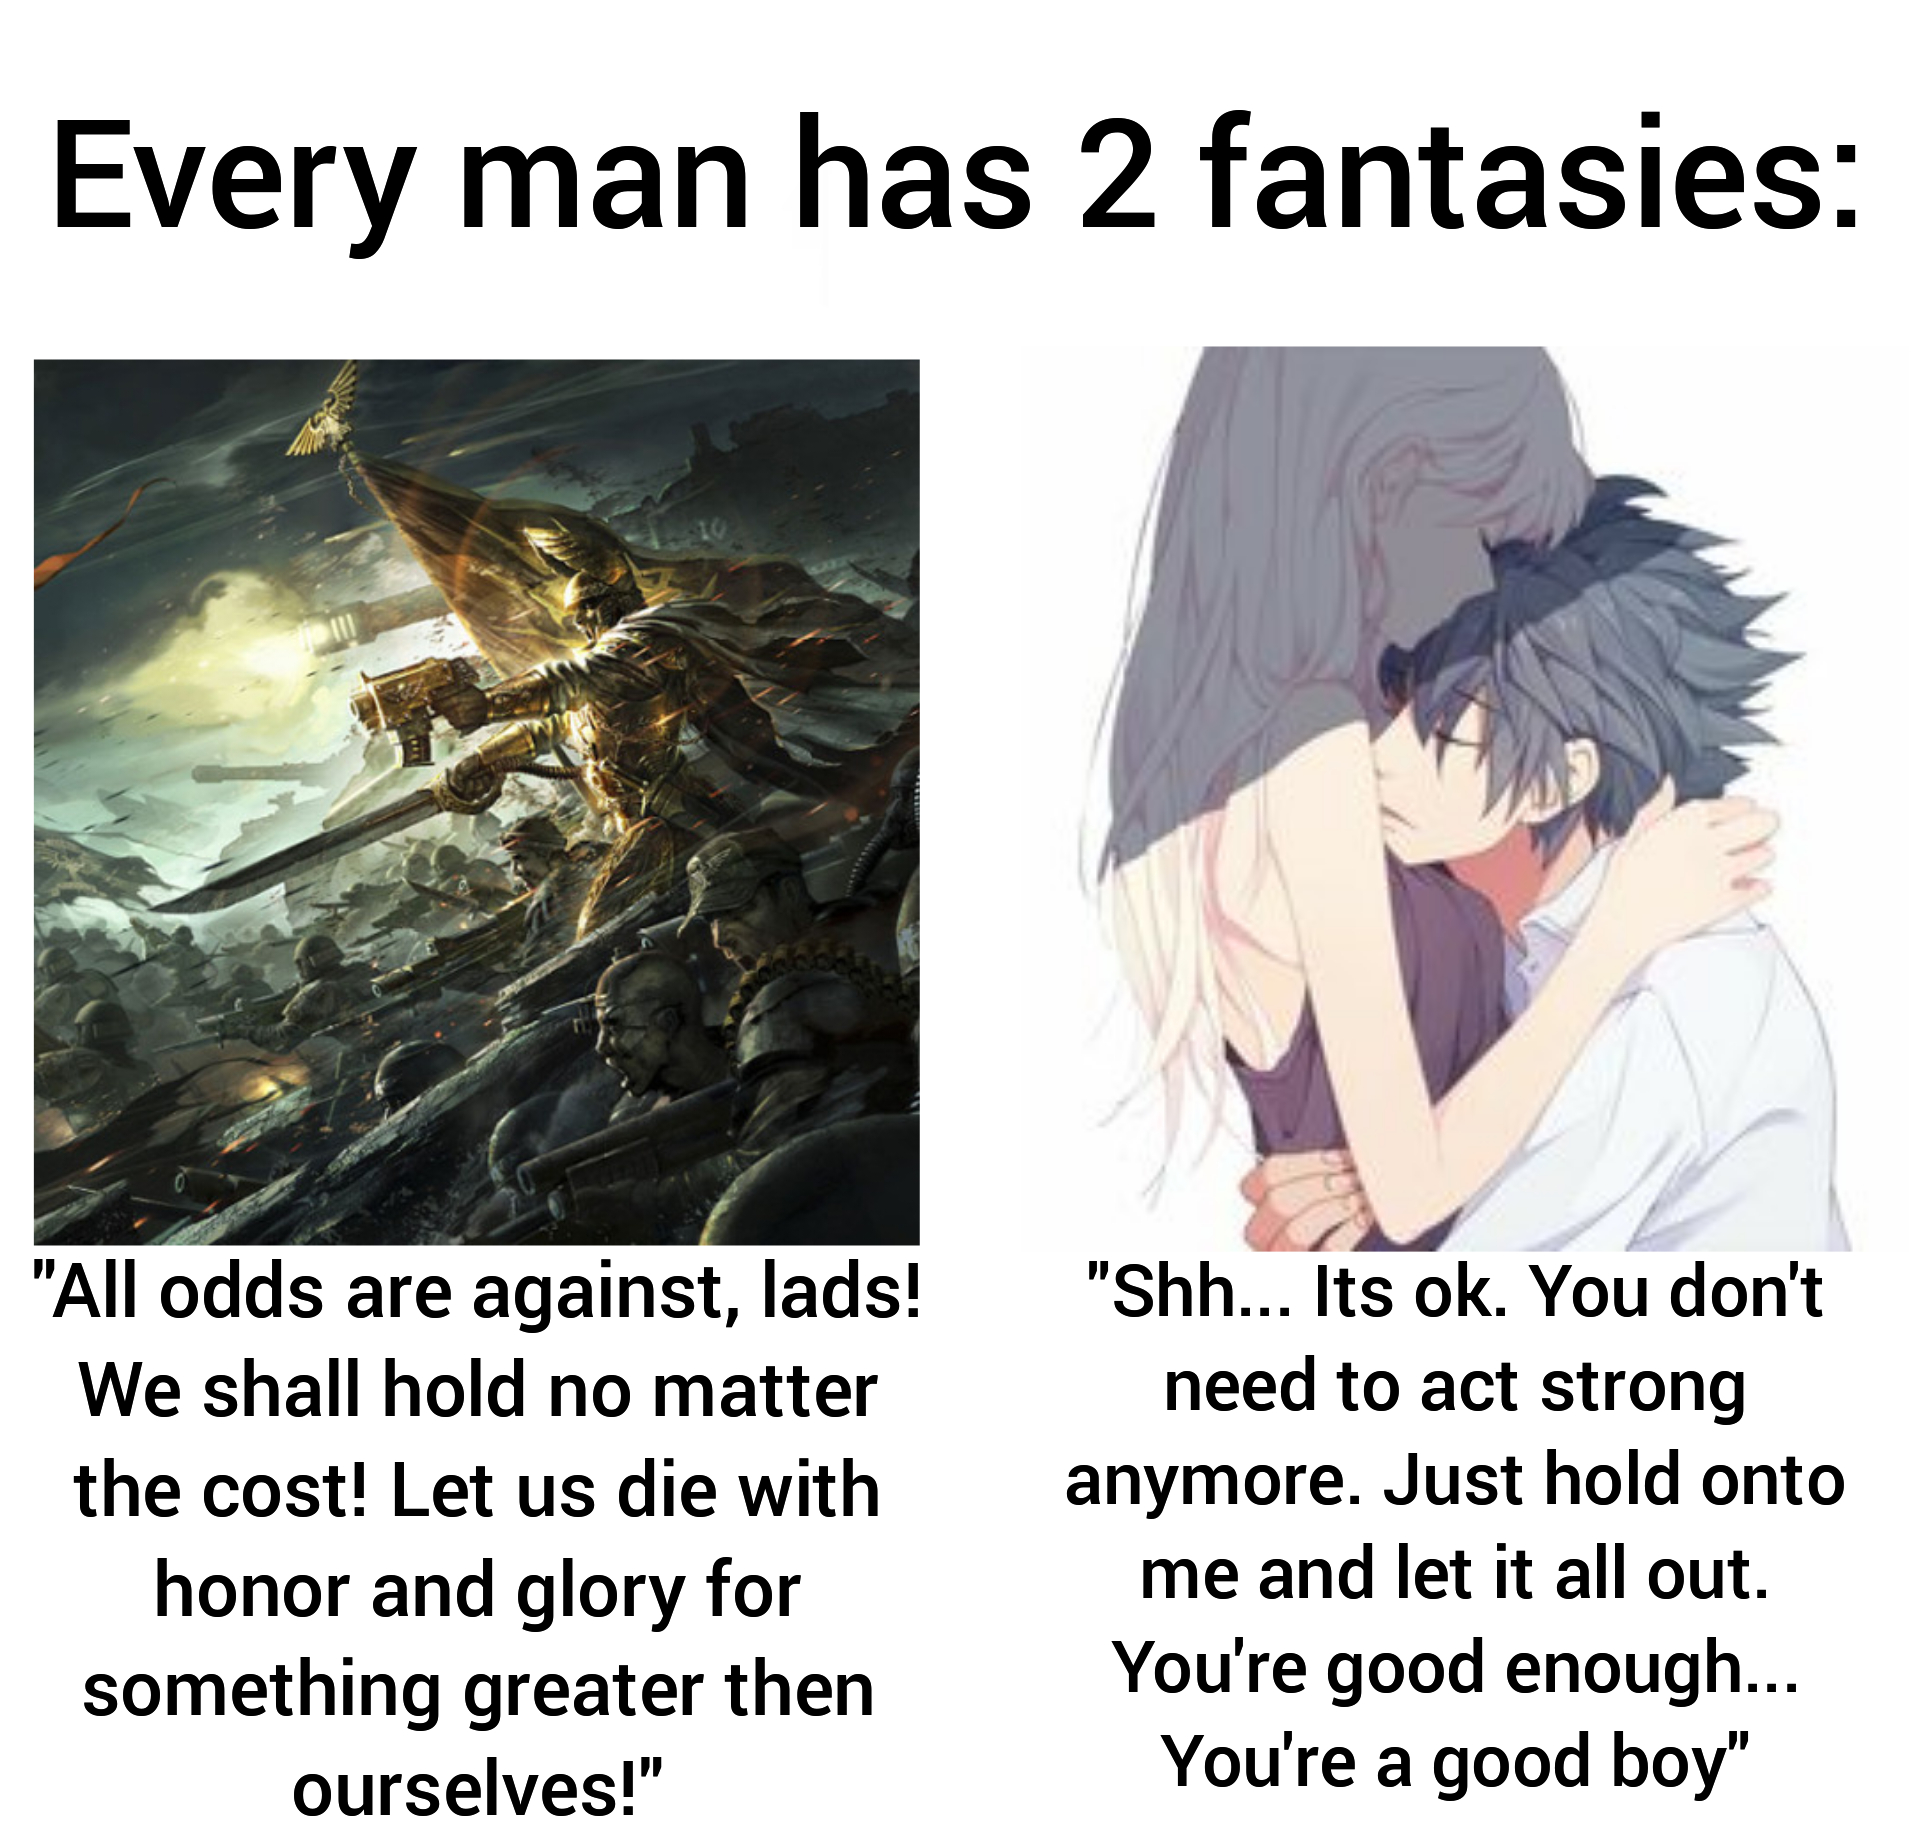 anime boy and girl kiss - Every man has 2 fantasies "All odds are against, lads! We shall hold no matter the cost! Let us die with honor and glory for something greater then ourselves!" "Shh... Its ok. You don't need to act strong anymore. Just hold onto 